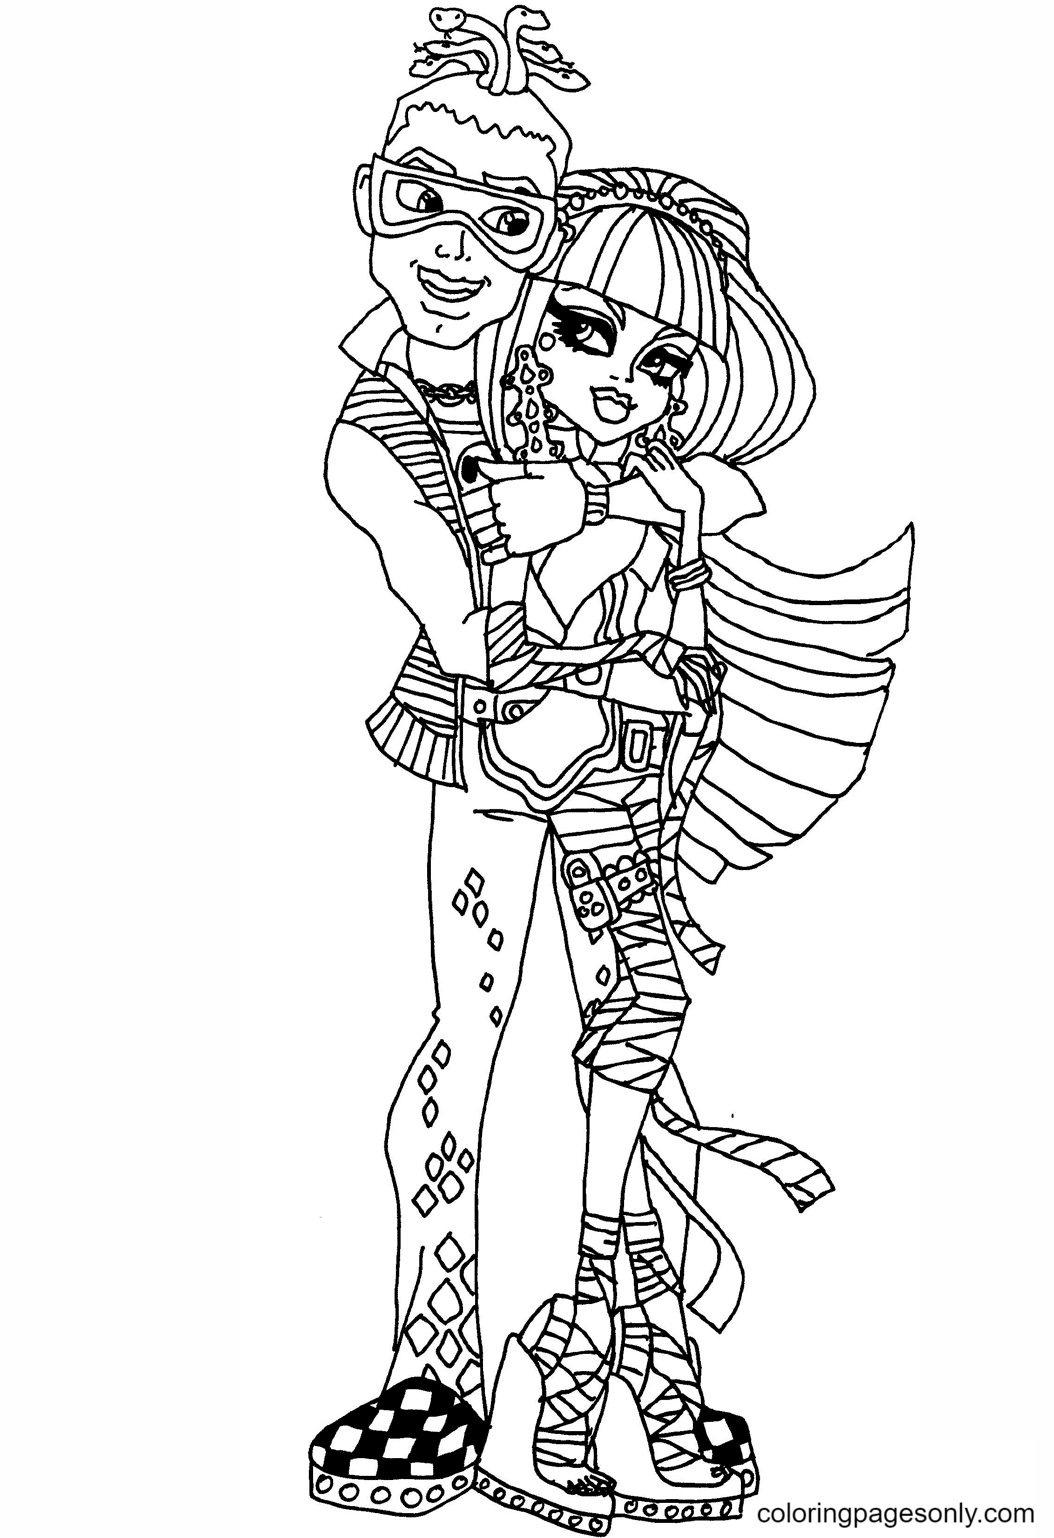 Deuce and Cleo Coloring Pages